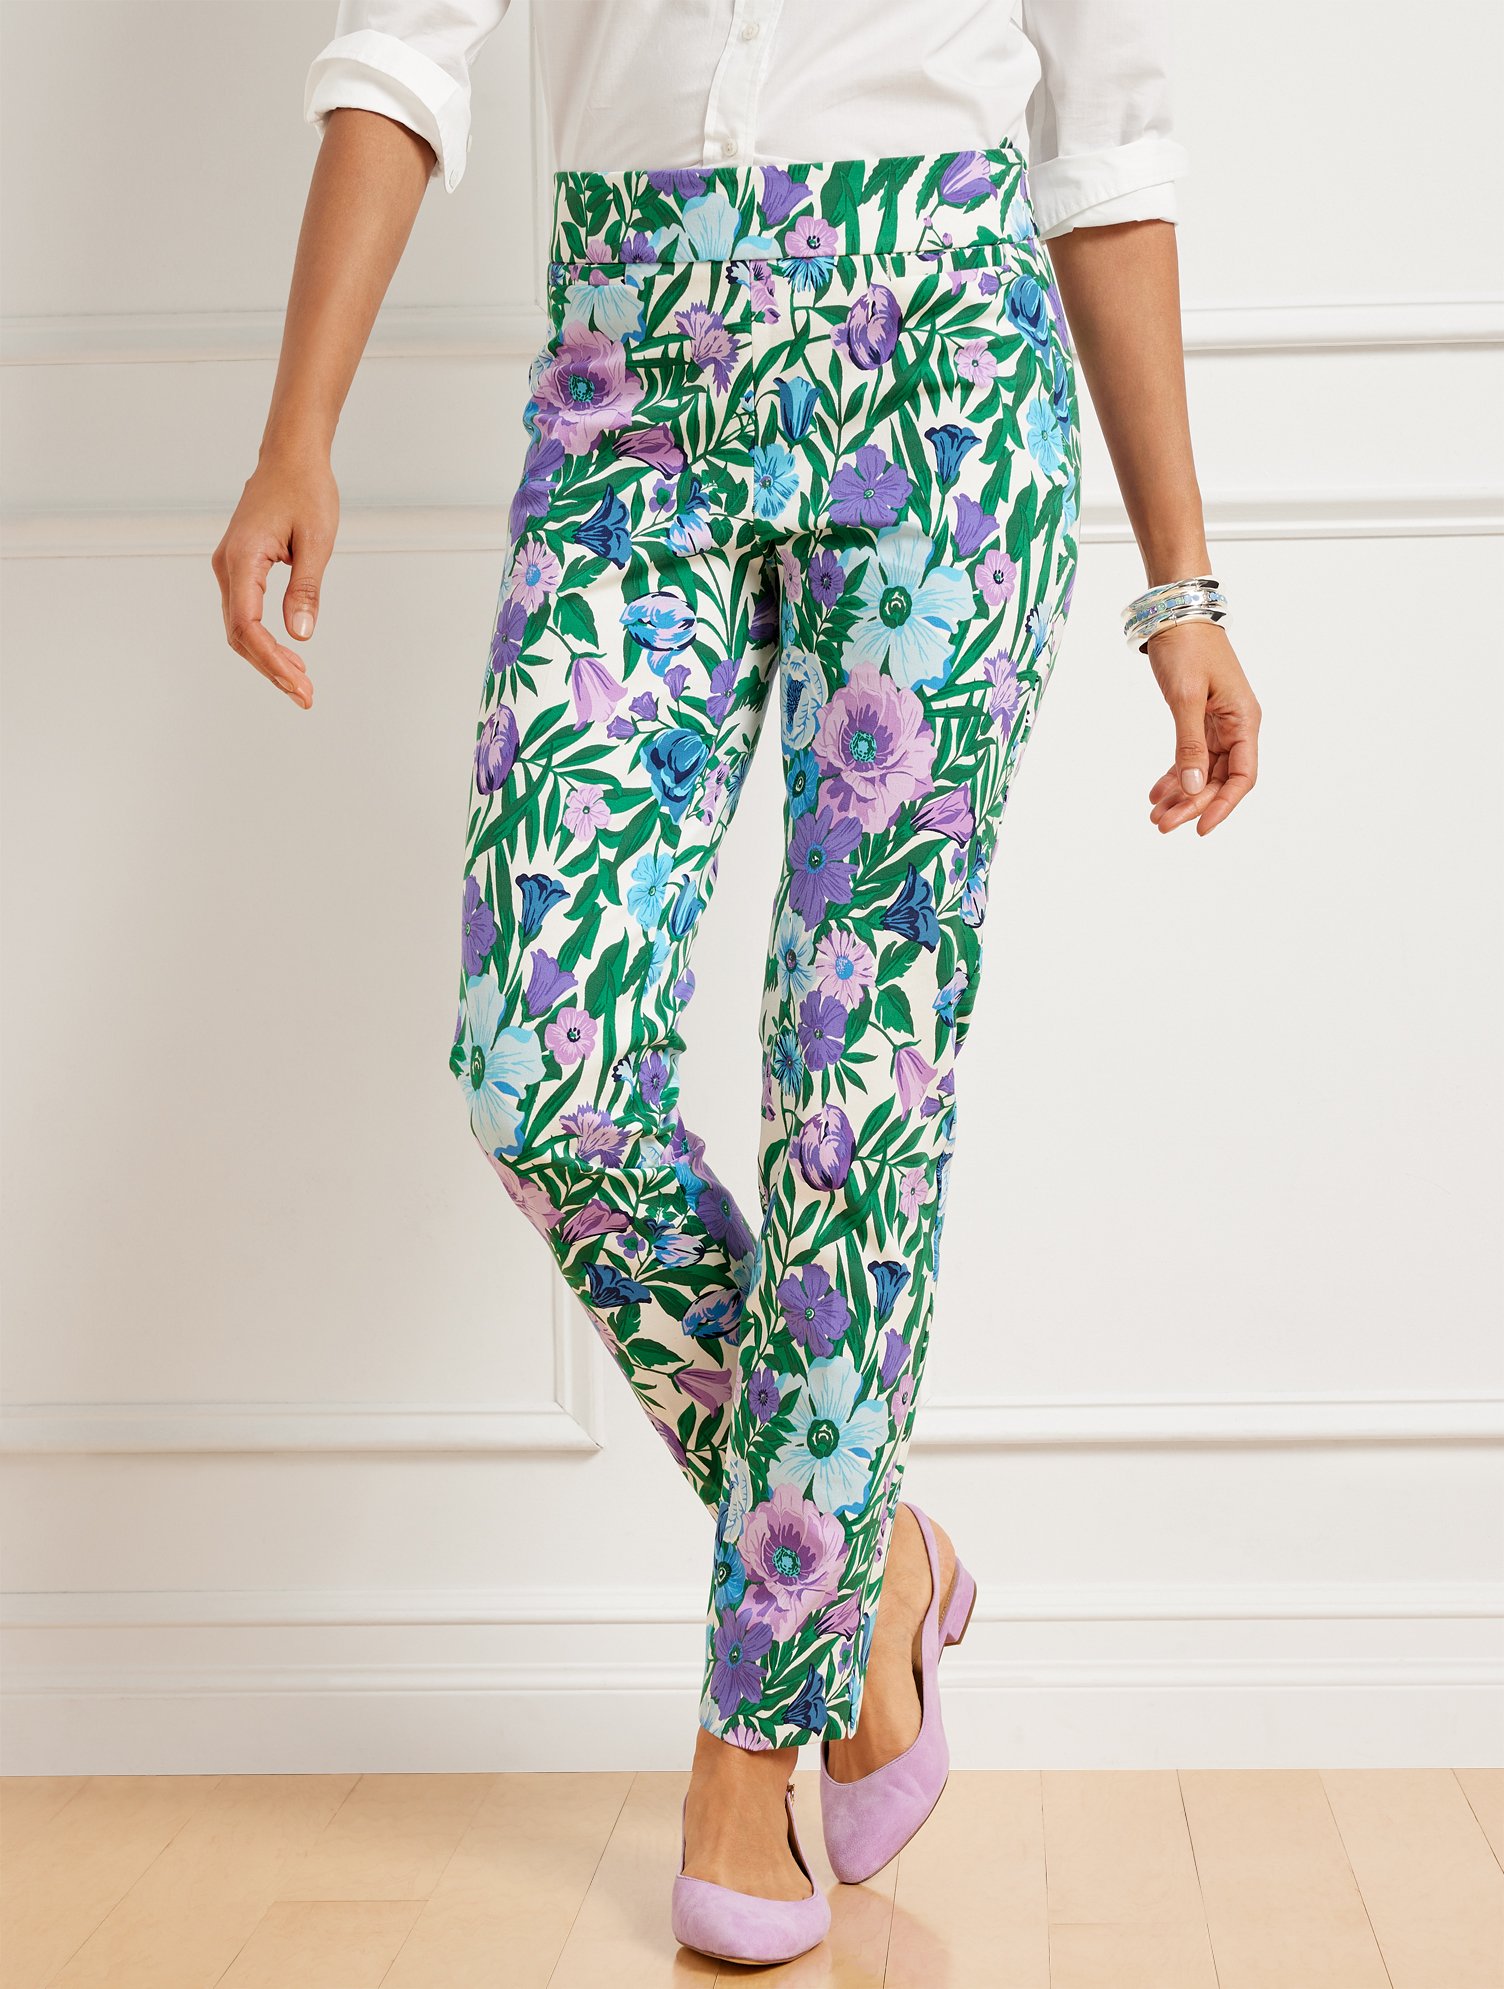 Talbots Petite -  Chatham Ankle Pants - Glorious Garden - Ivory - 14